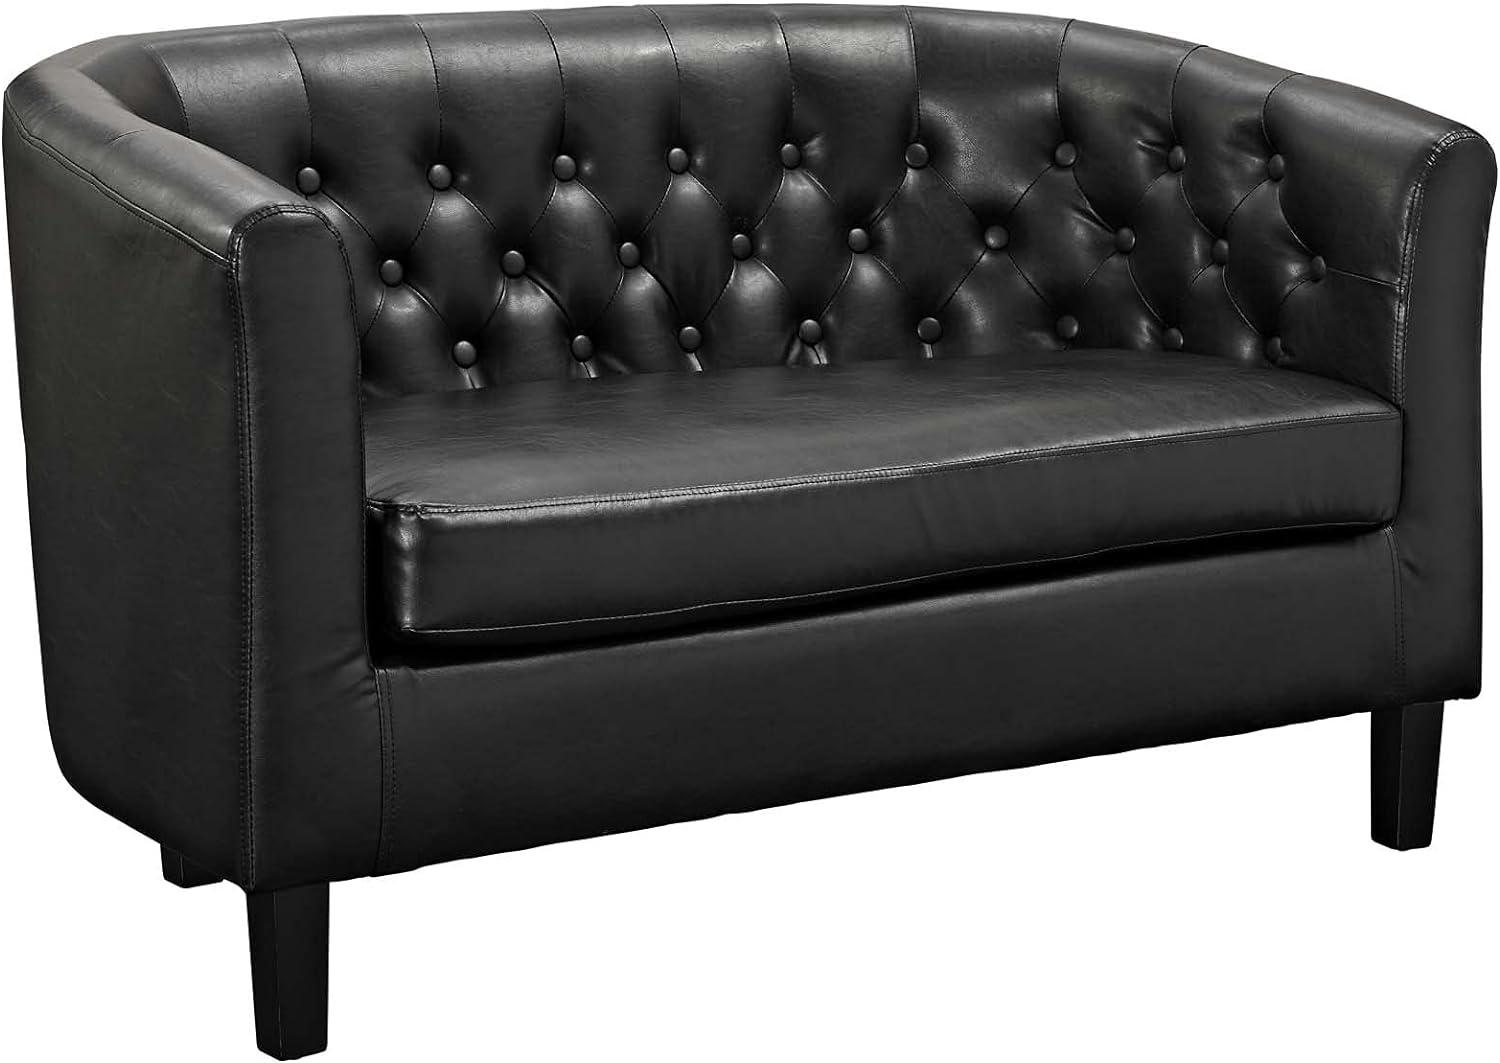 Classic Chesterfield Black Faux Leather Tufted Loveseat with Wood Legs